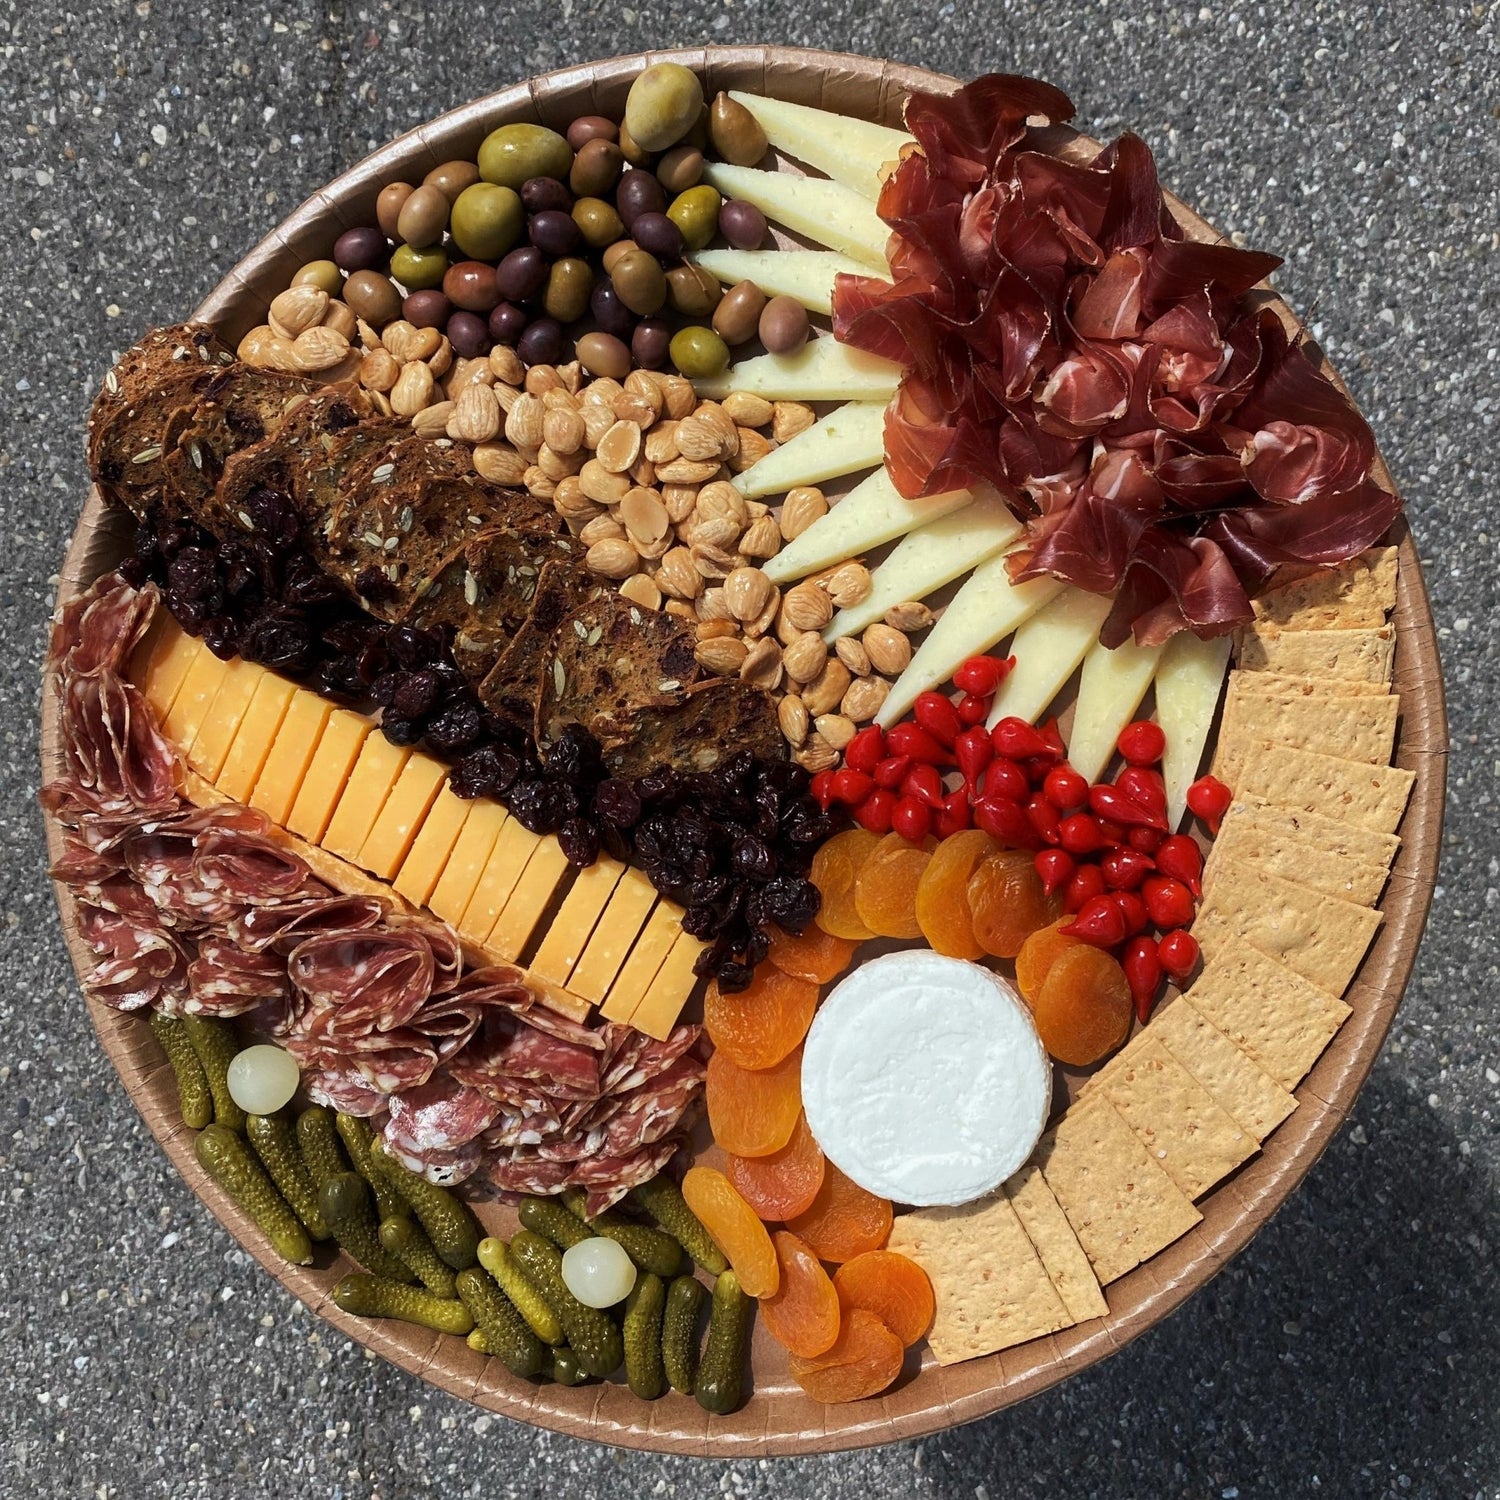 Our Cheese and Charcuterie Boards